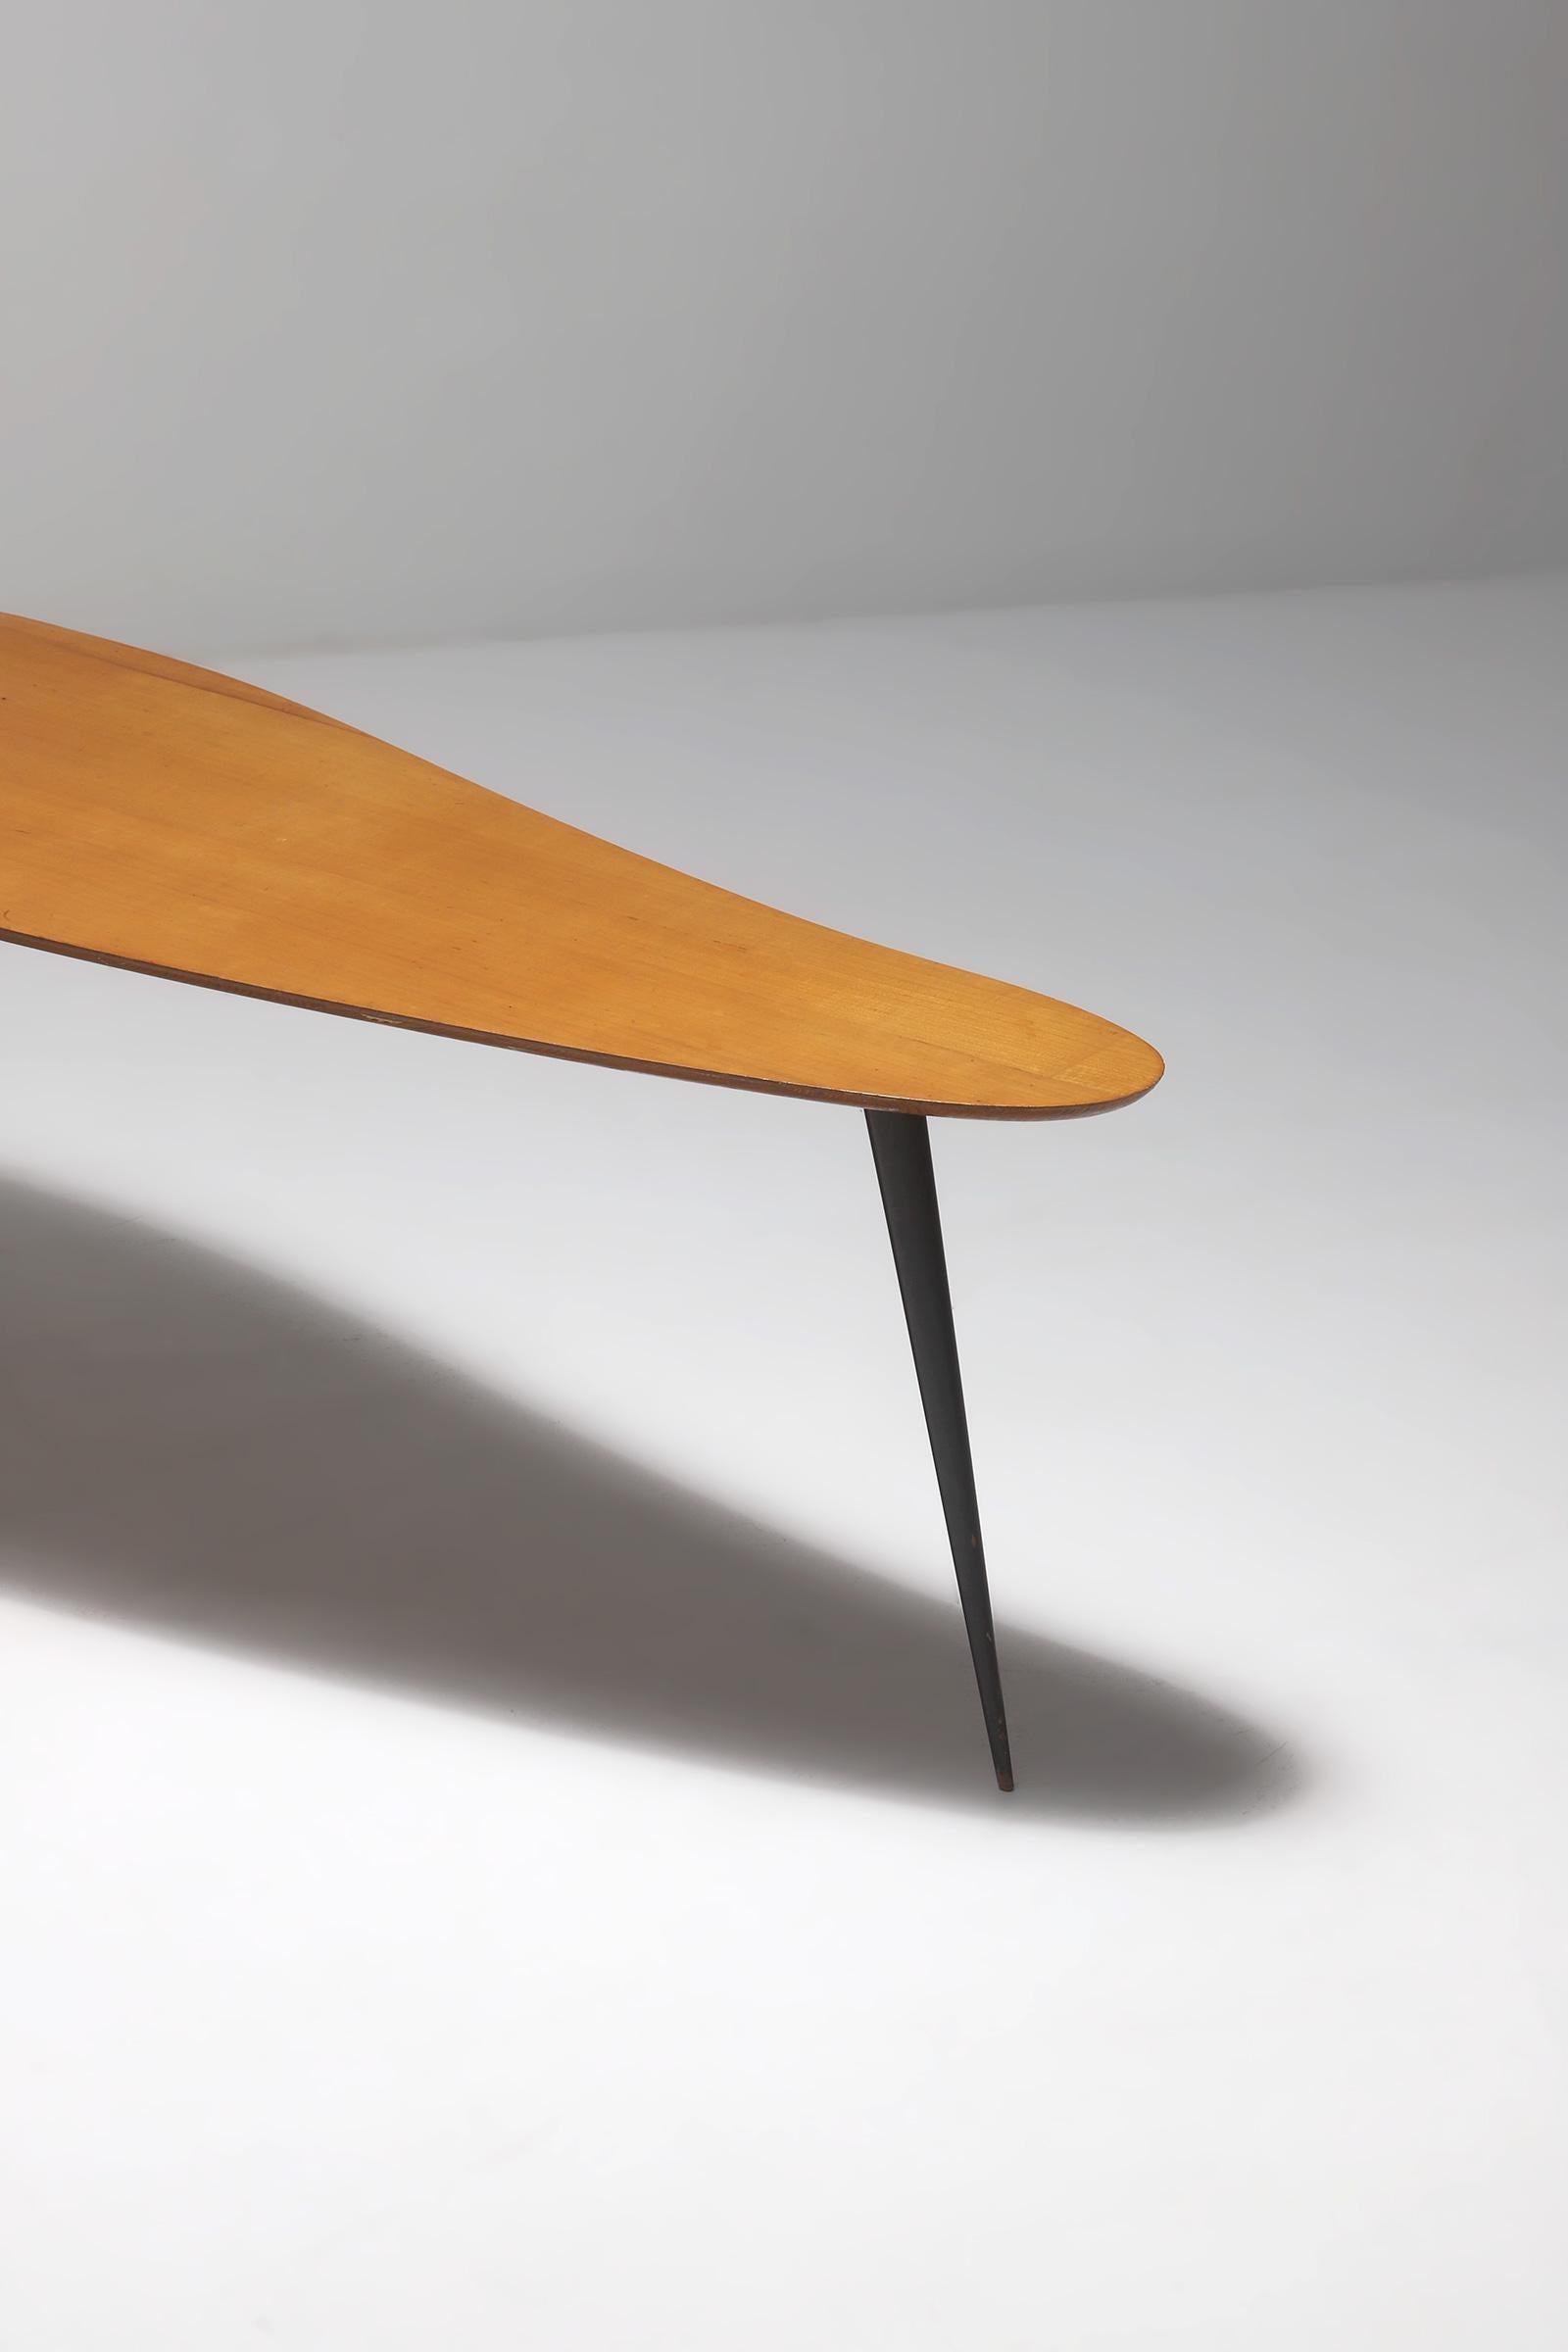 Wood Free Form Shaped Coffee Table, 1950s